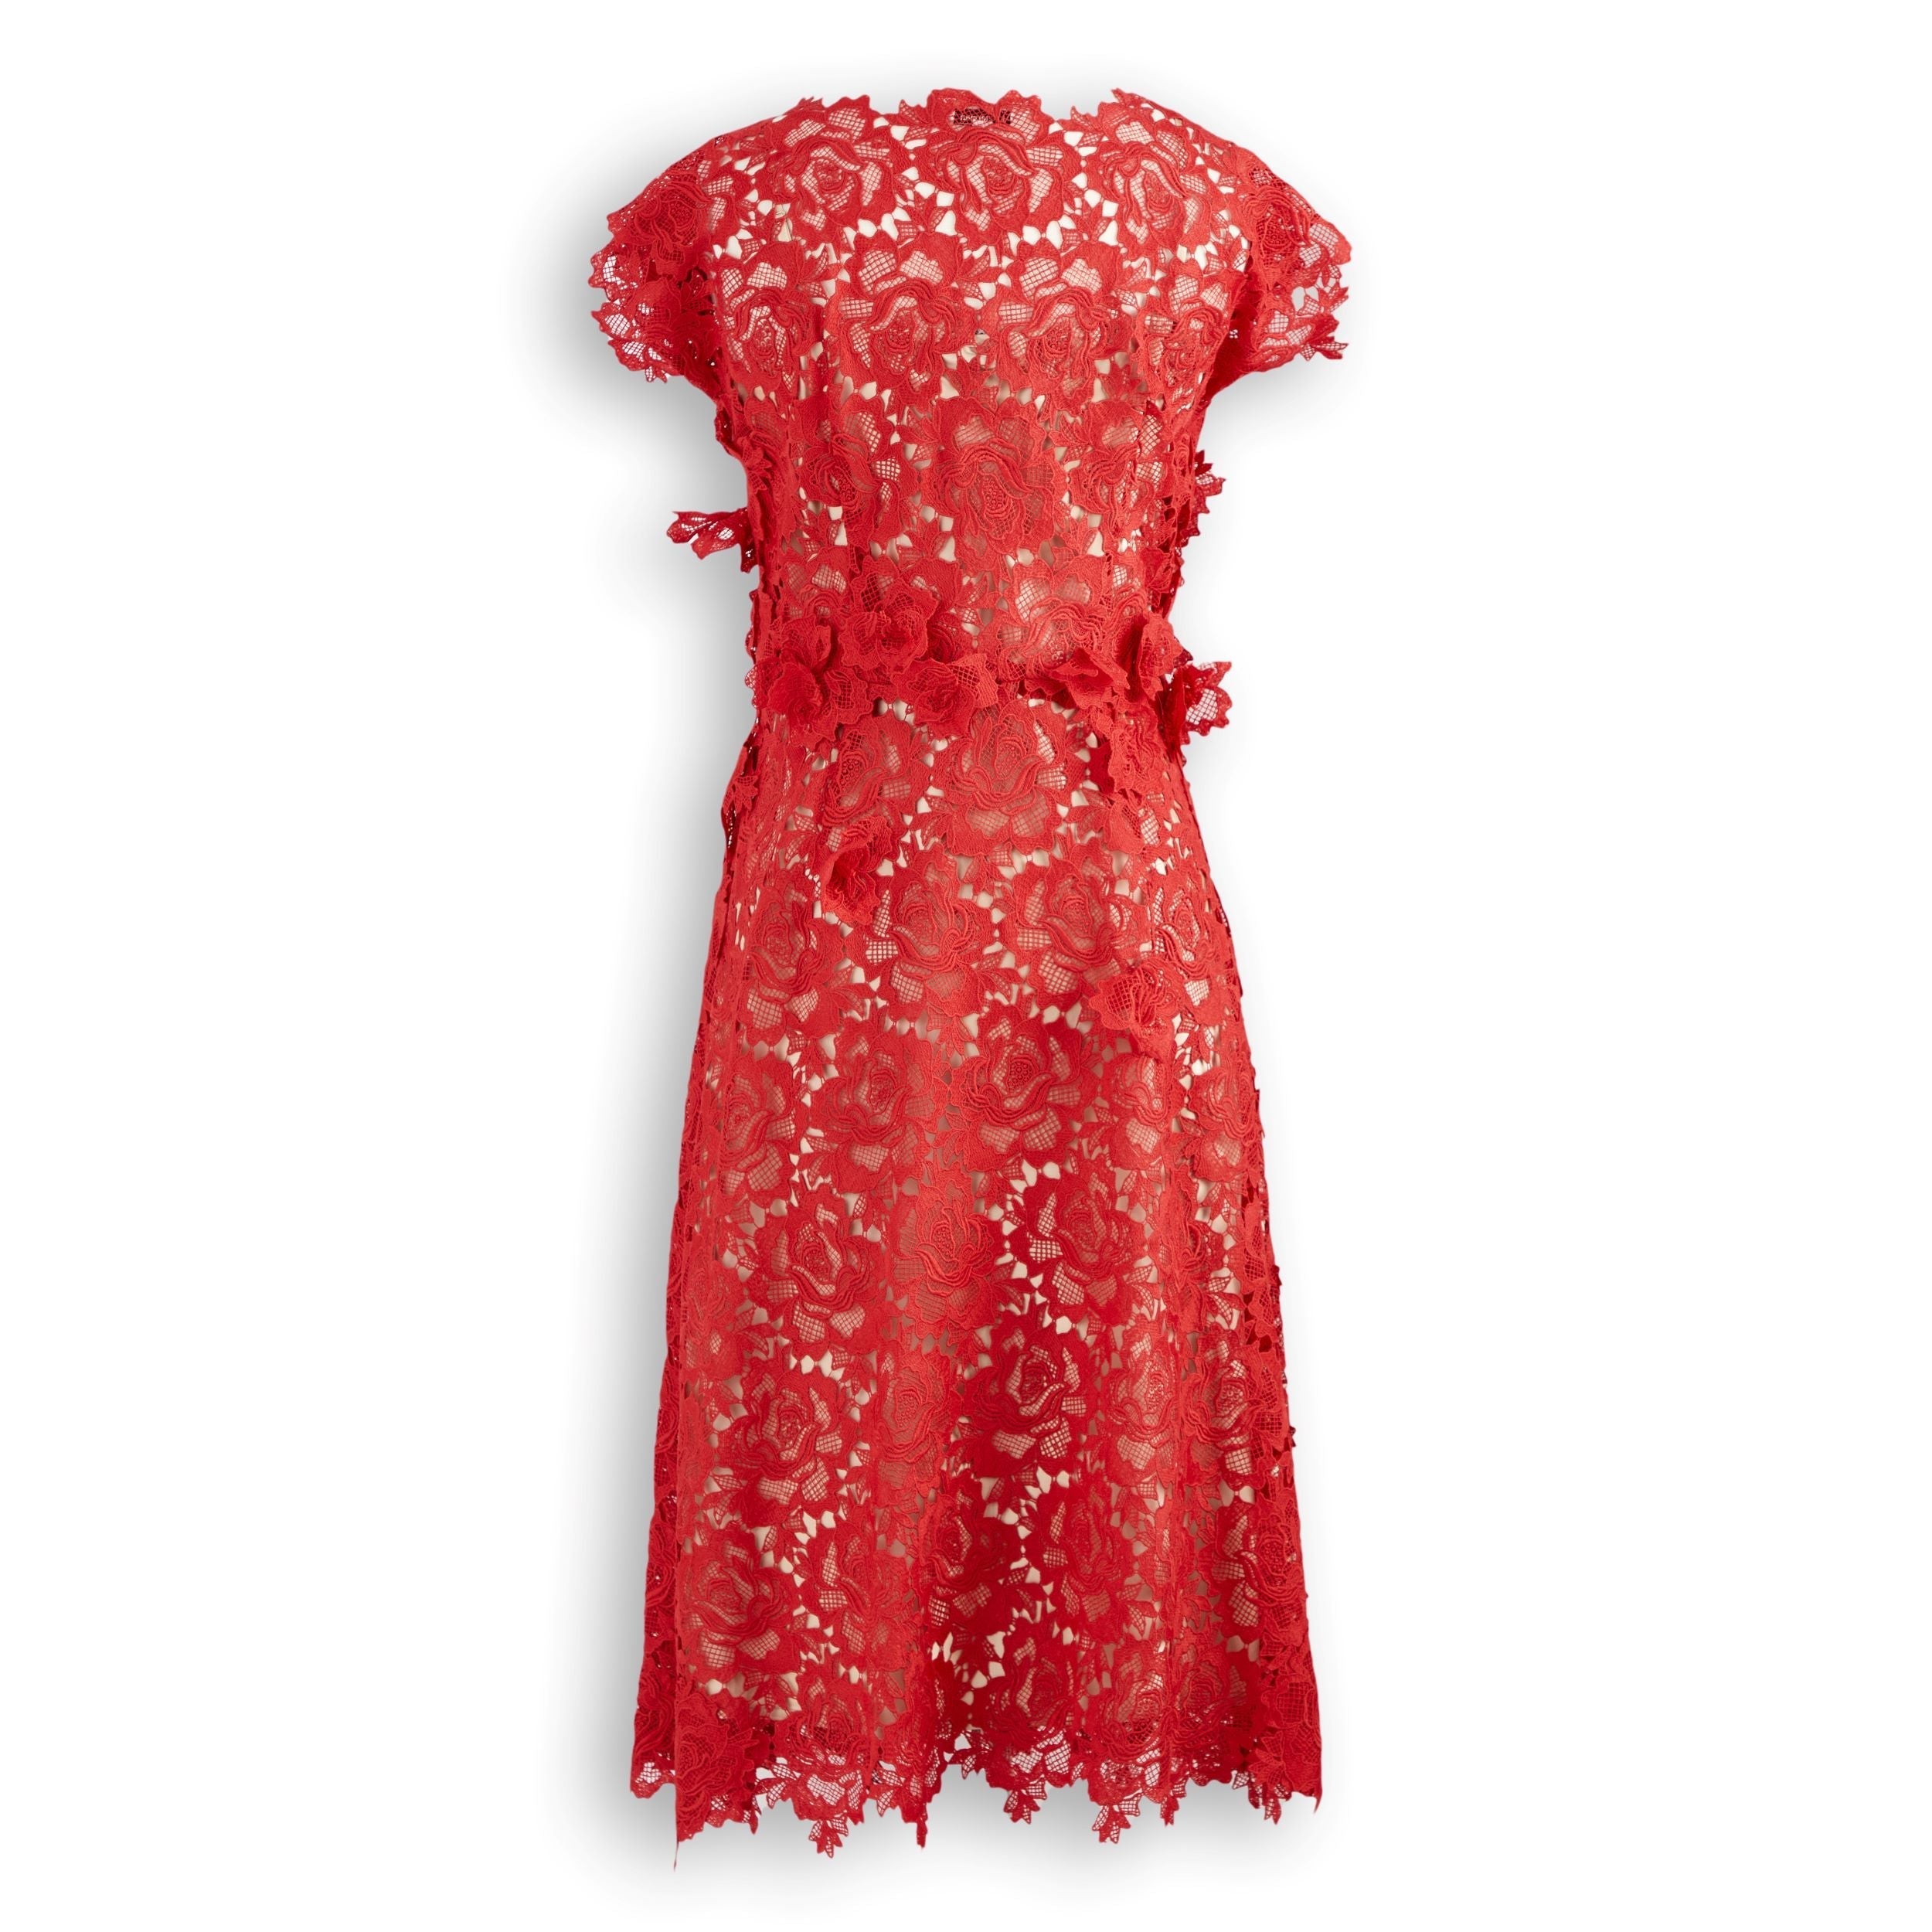 3D Flower Scalloped Edge Lace Dress Red